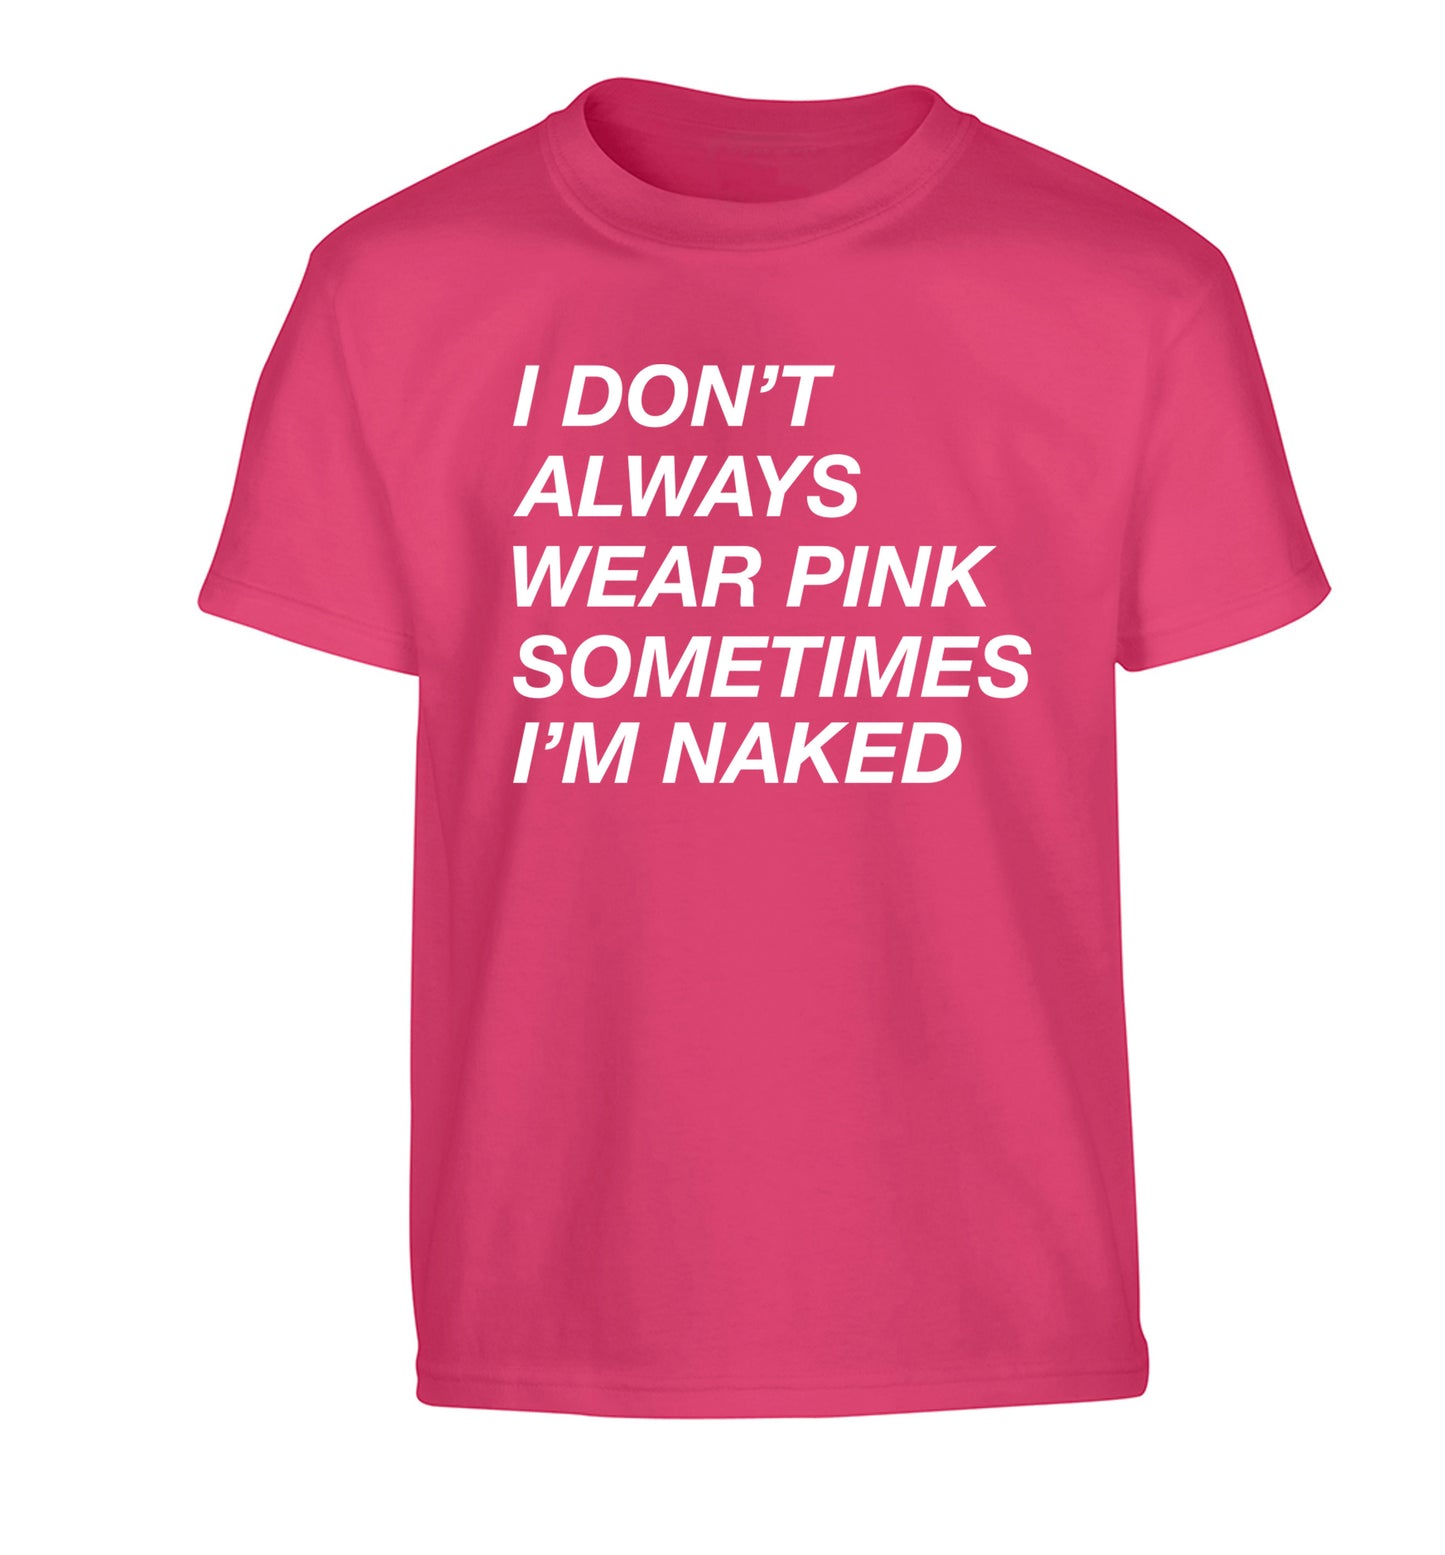 I don't always wear pink sometimes I'm naked Children's pink Tshirt 12-13 Years